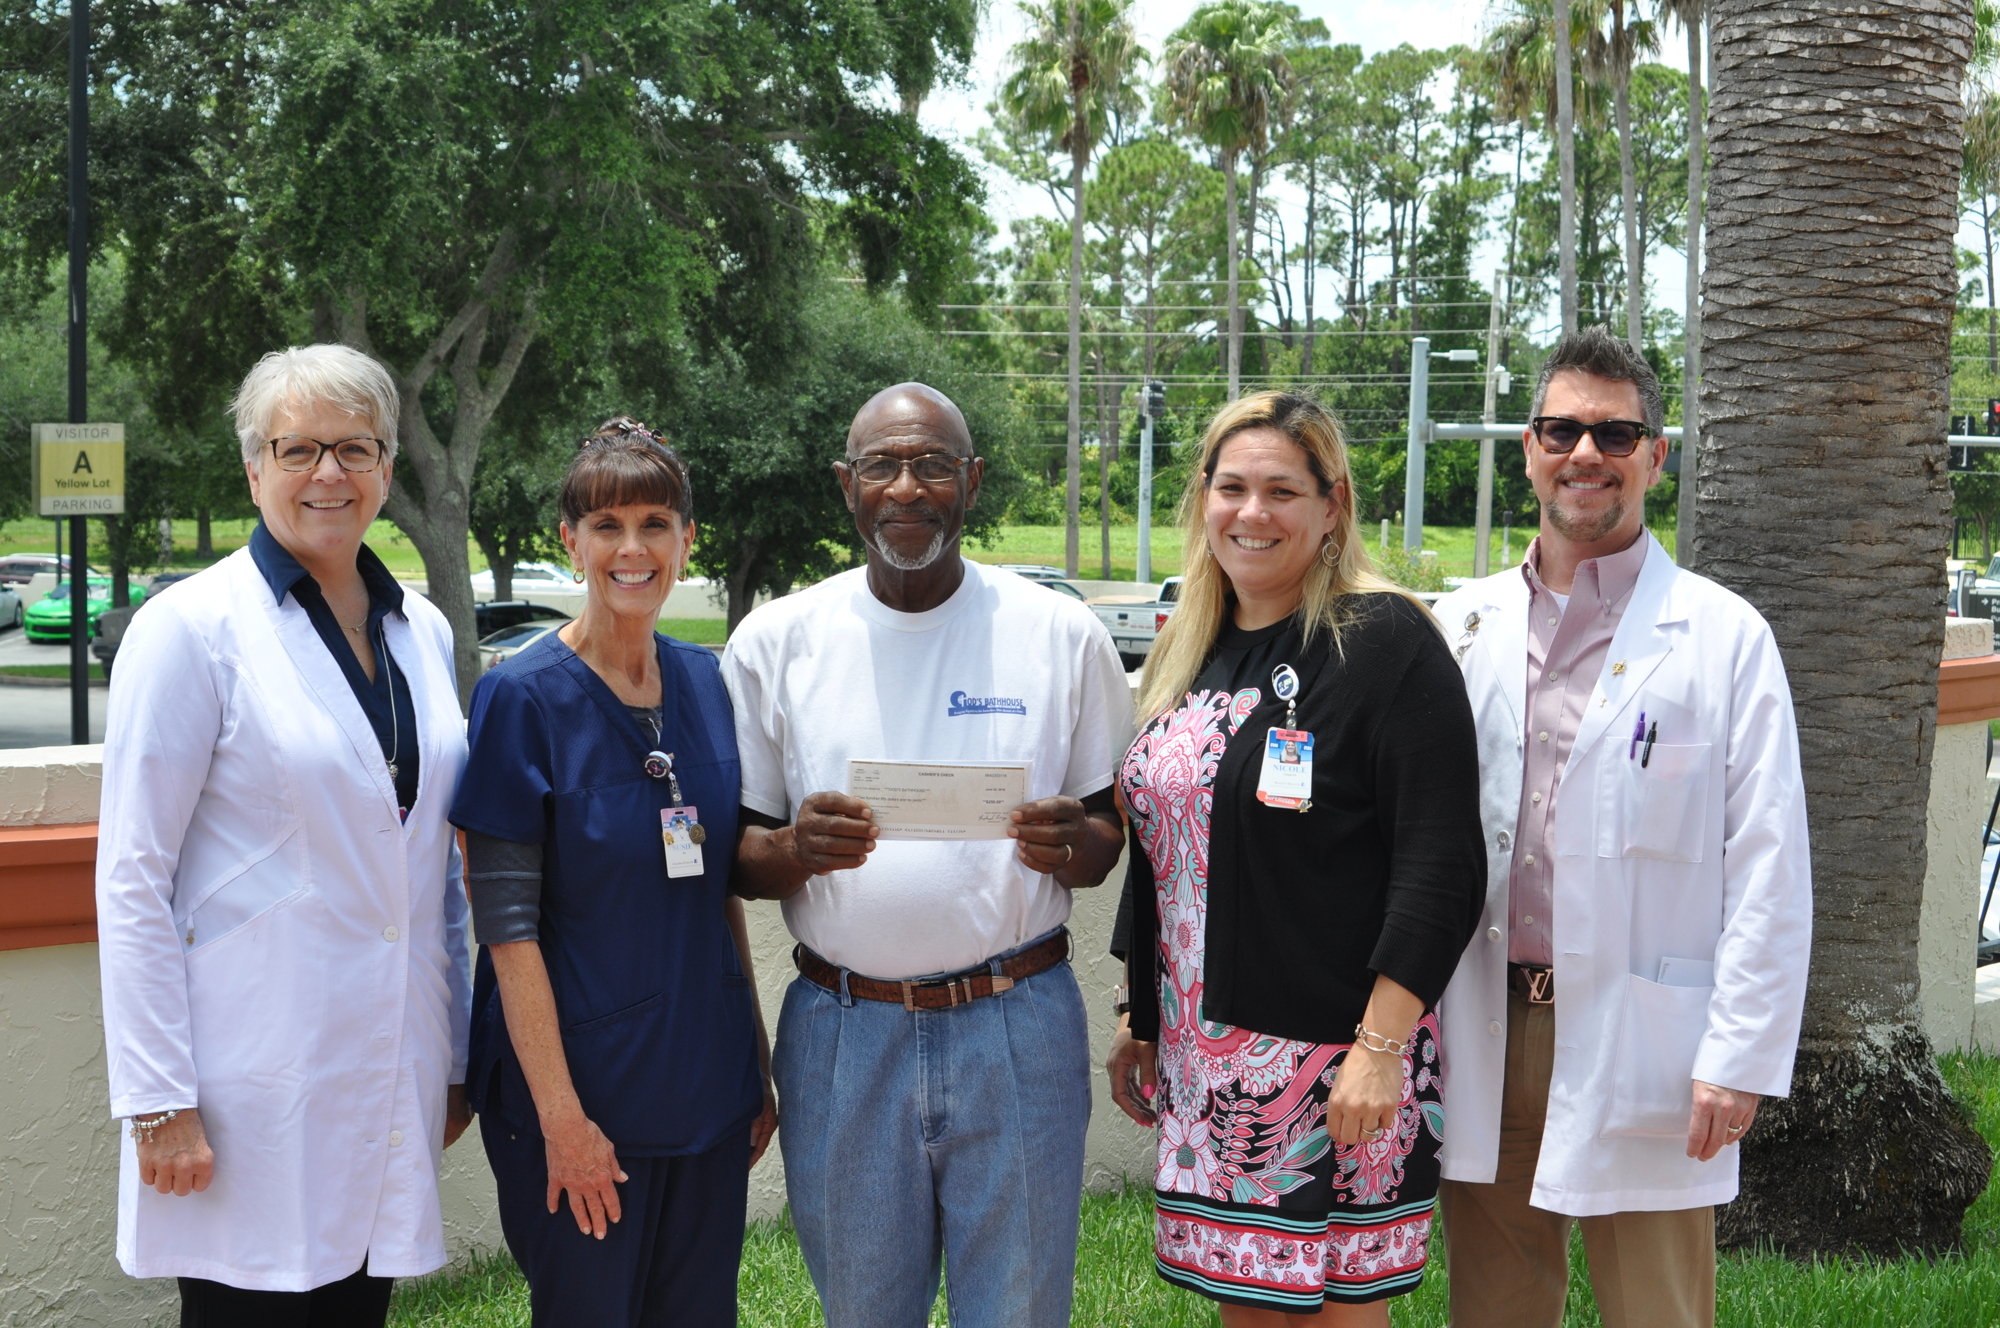 A Halifax Health nursing group donated to God’s Bathhouse of Volusia. Shown are Chief Nursing Officer Catherine Luchsinger; Susie Johnson; Elgia Glass, founder of God’s Bathhouse of Volusia; Nicole Smith; and Dan Elko.    